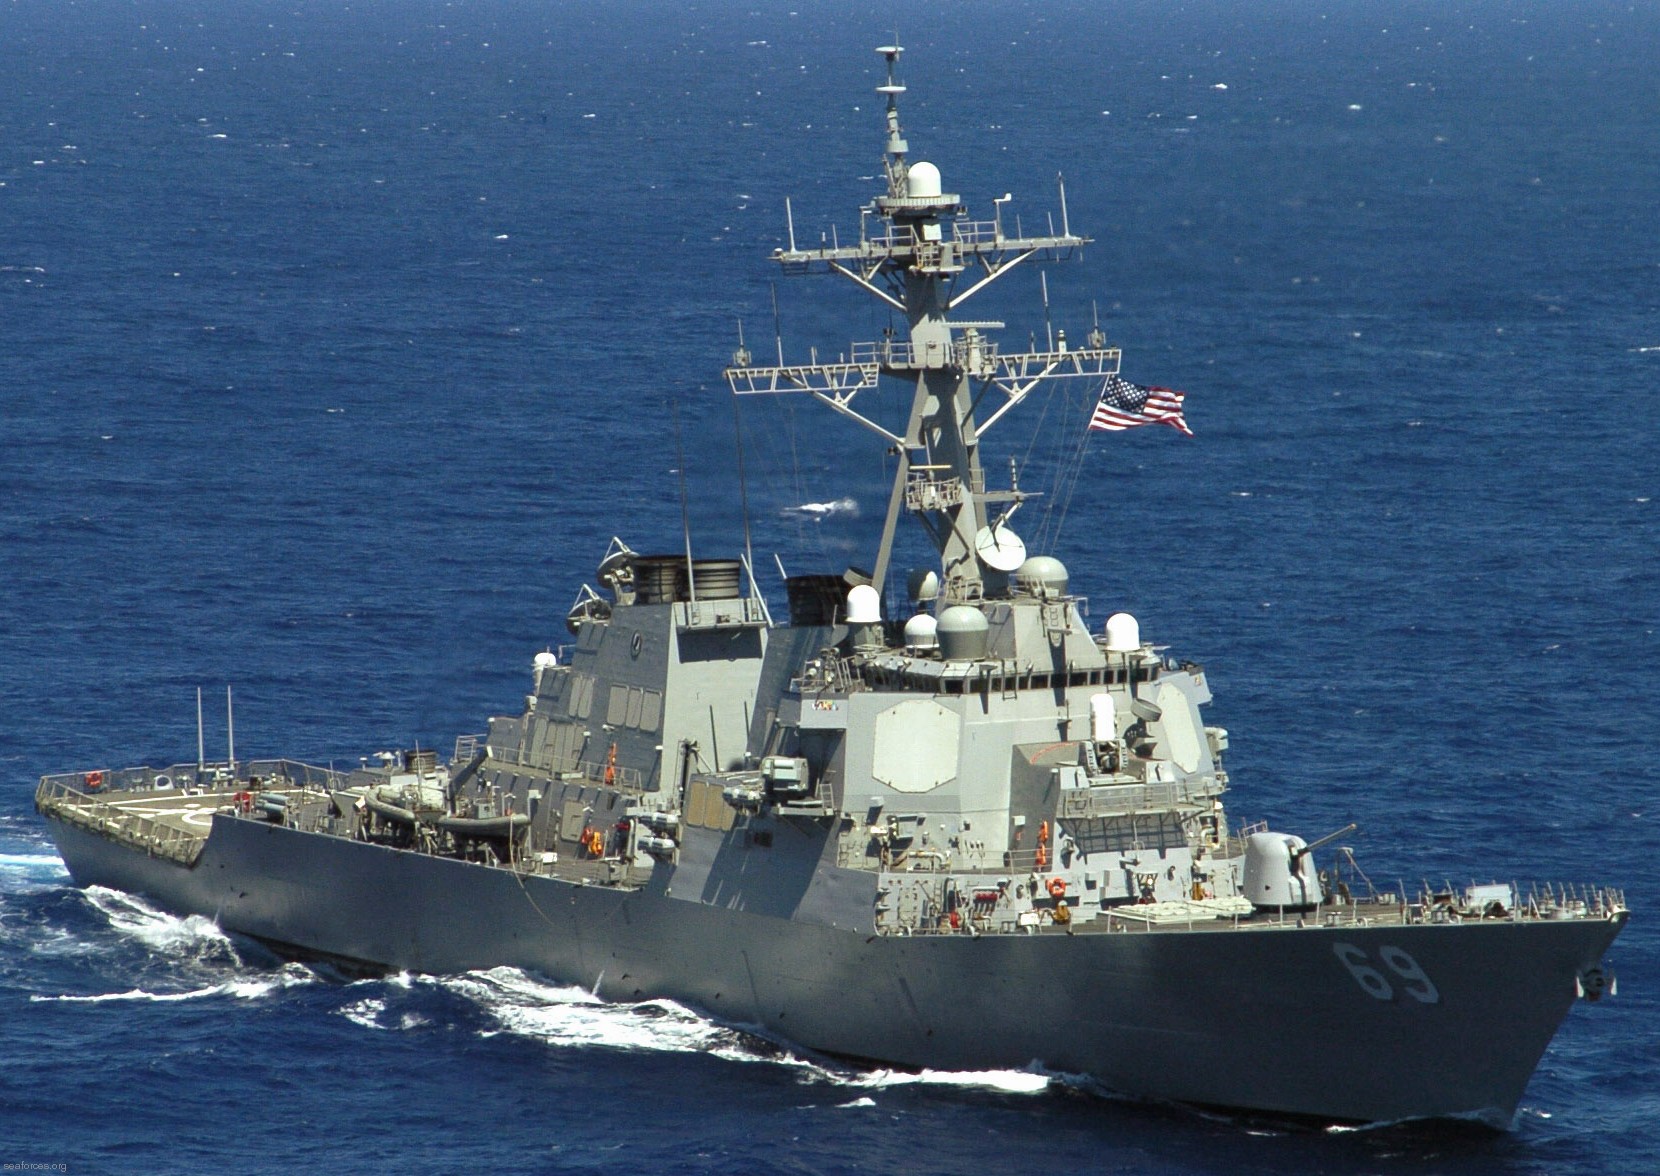 ddg-69 uss milius guided missile destroyer arleigh burke class aegis bmd 34 exercise rimpac 2006 hawaii